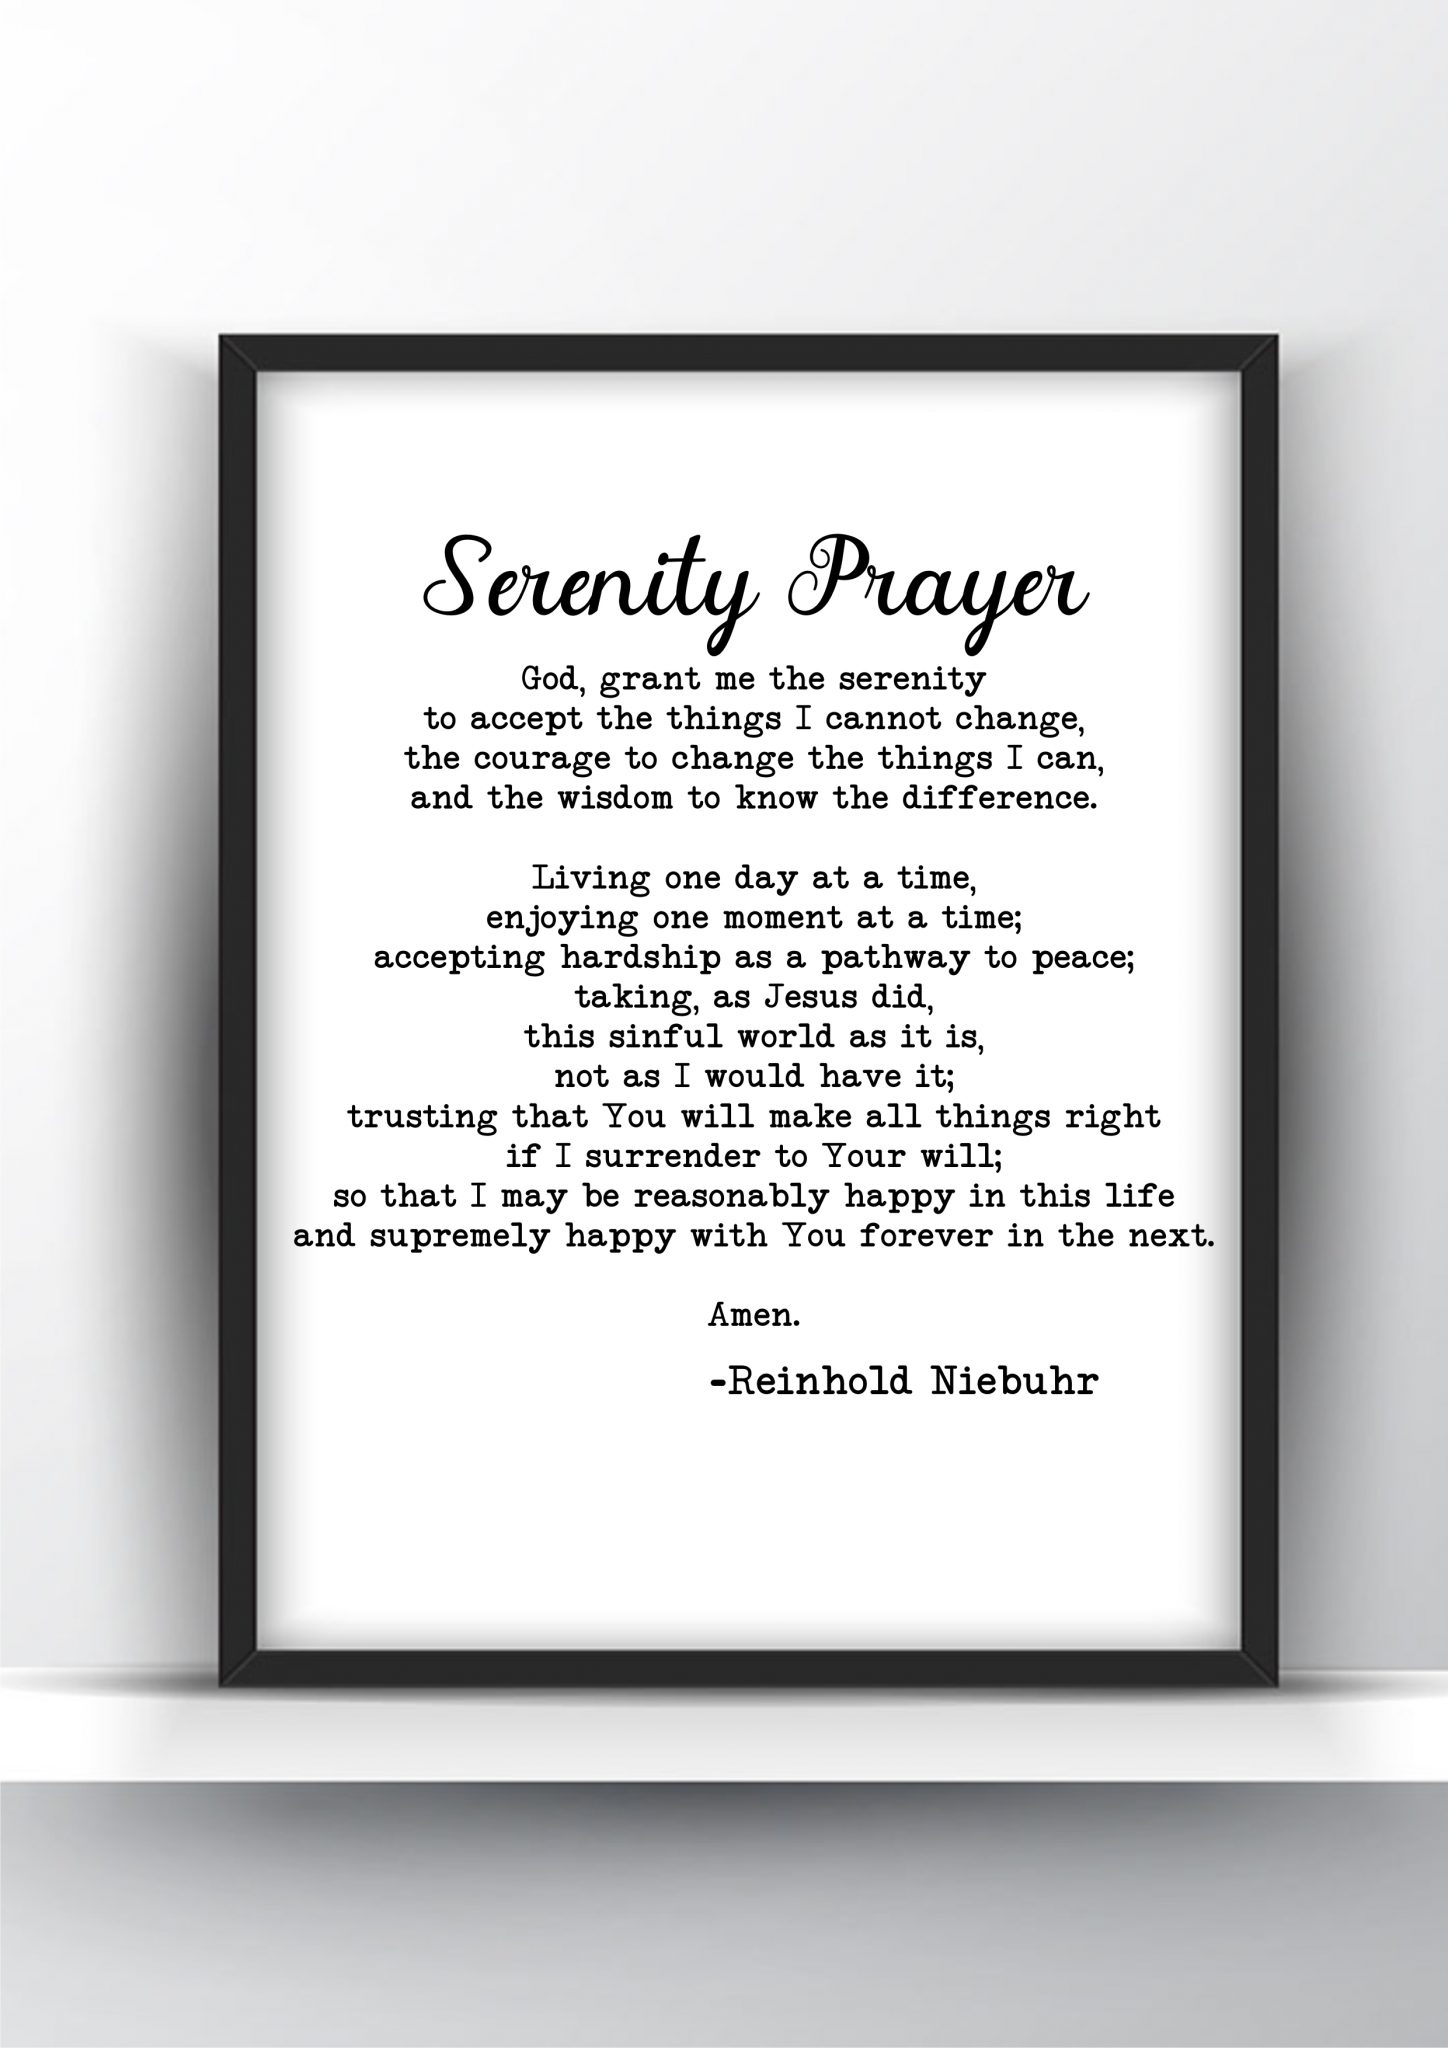 serenity prayer by reinhold niebuhr printable and poster